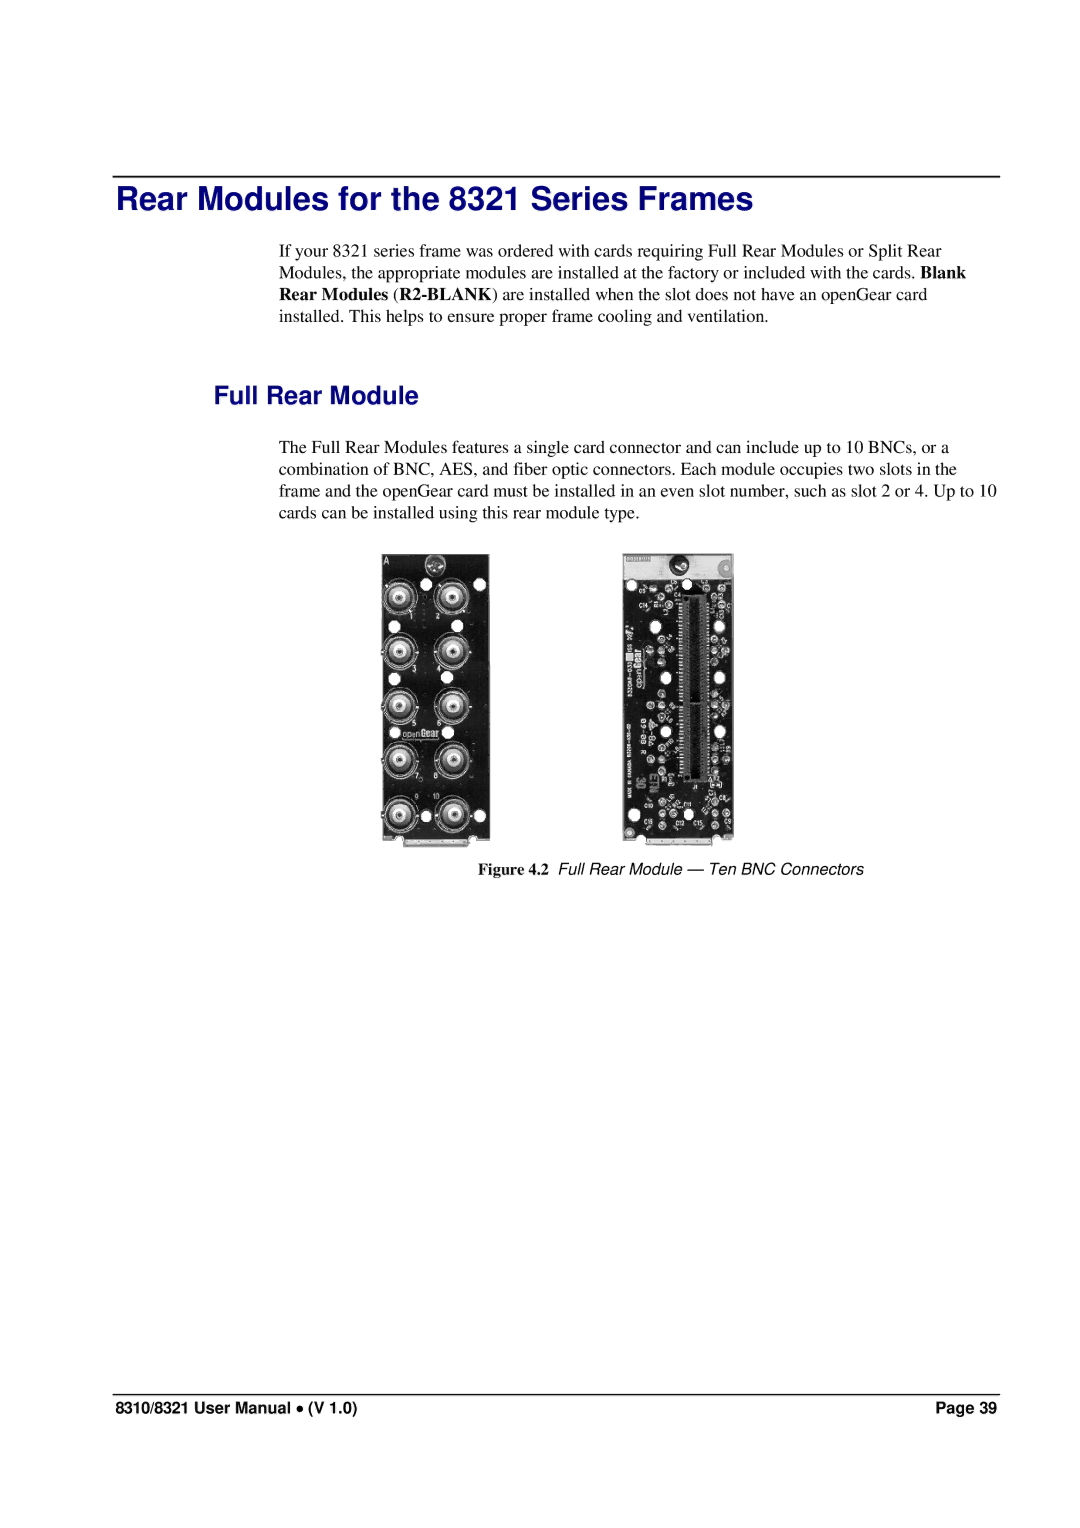 Cobalt Networks 8321(-C), 8310(-C) user manual Rear Modules for the 8321 Series Frames 